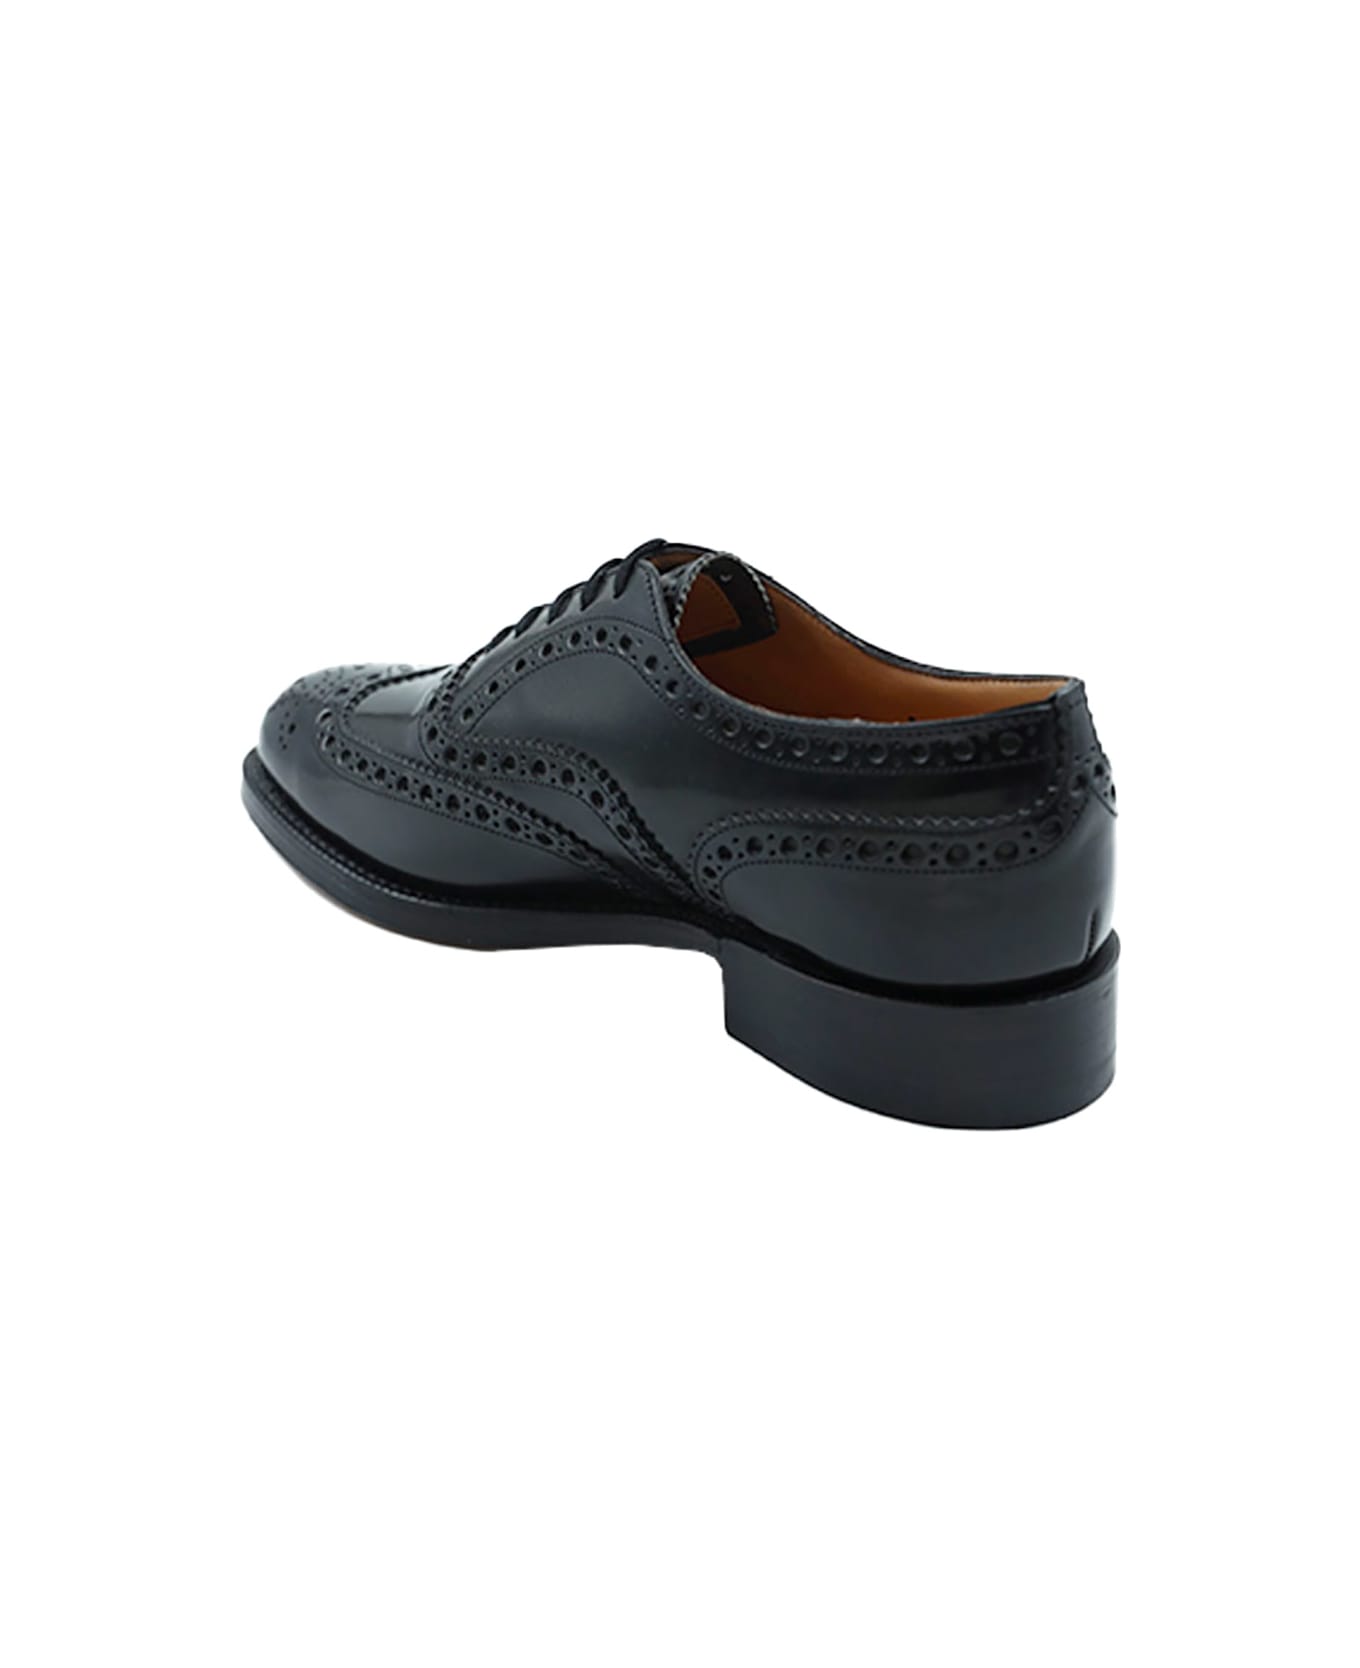 Church's Full Brogue Lace-up Oxford - Black